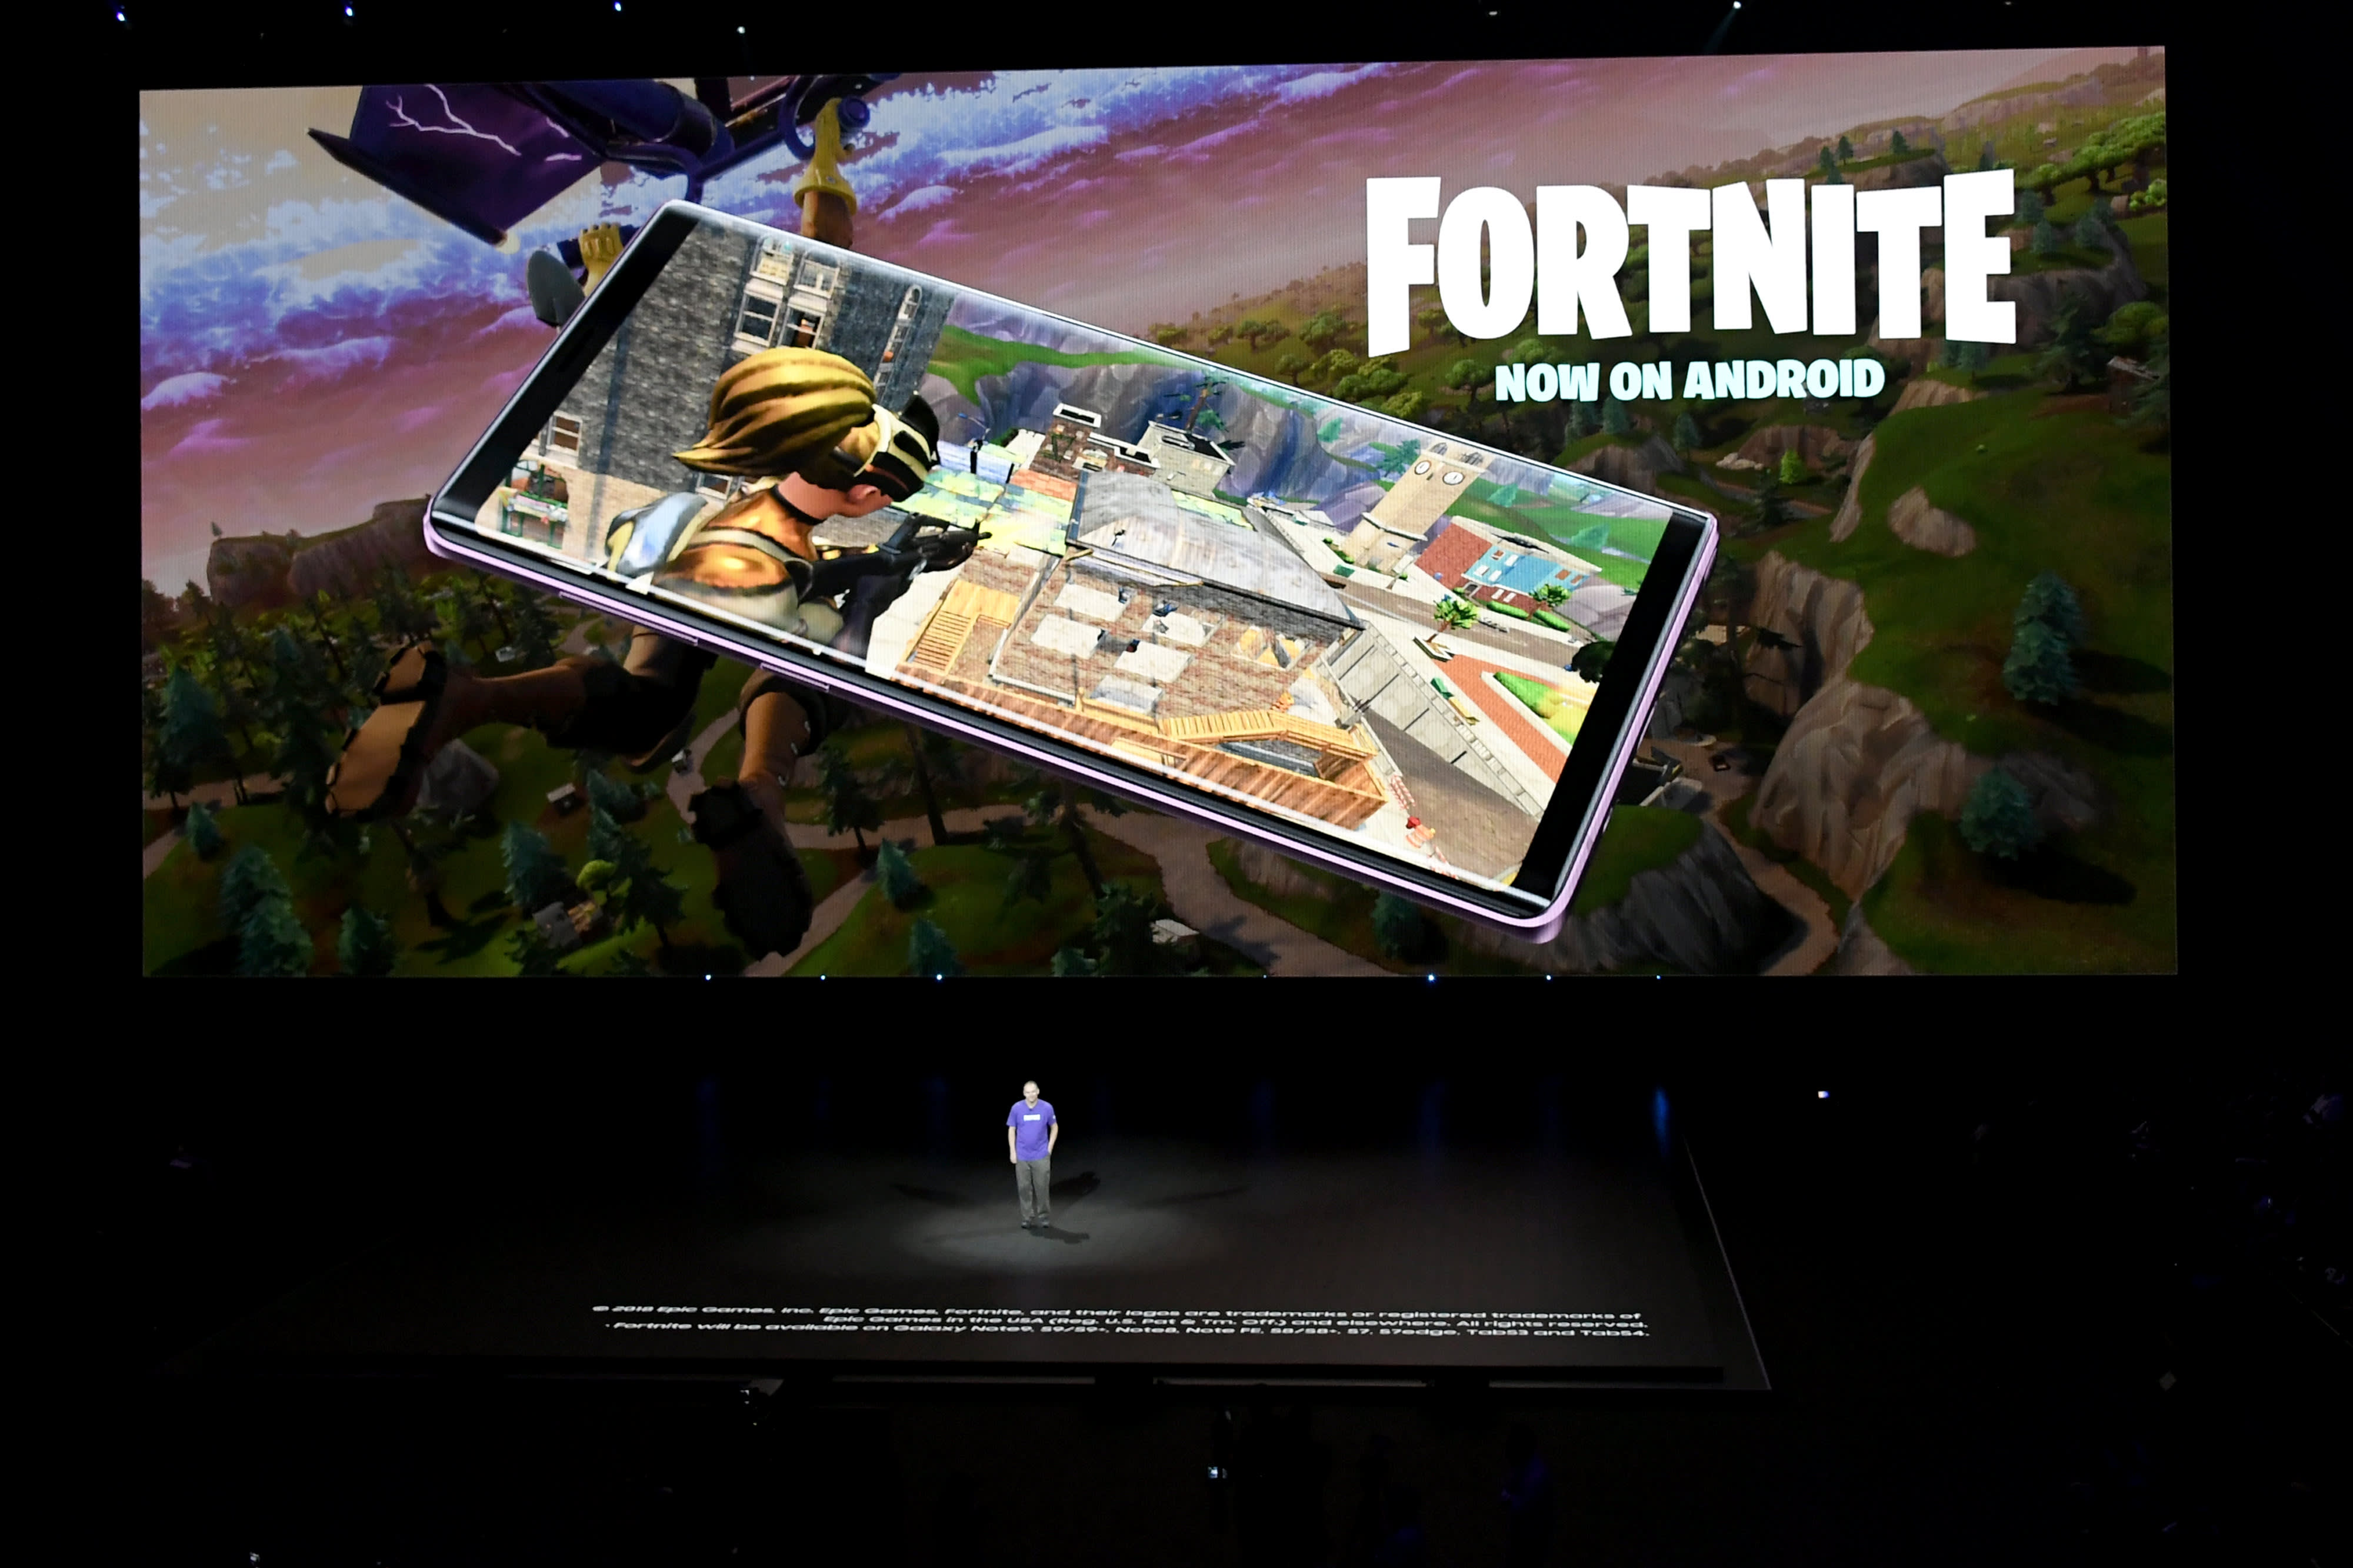 Fortnite Comes Back To iPhone Via GeForce NOW Cloud Gaming